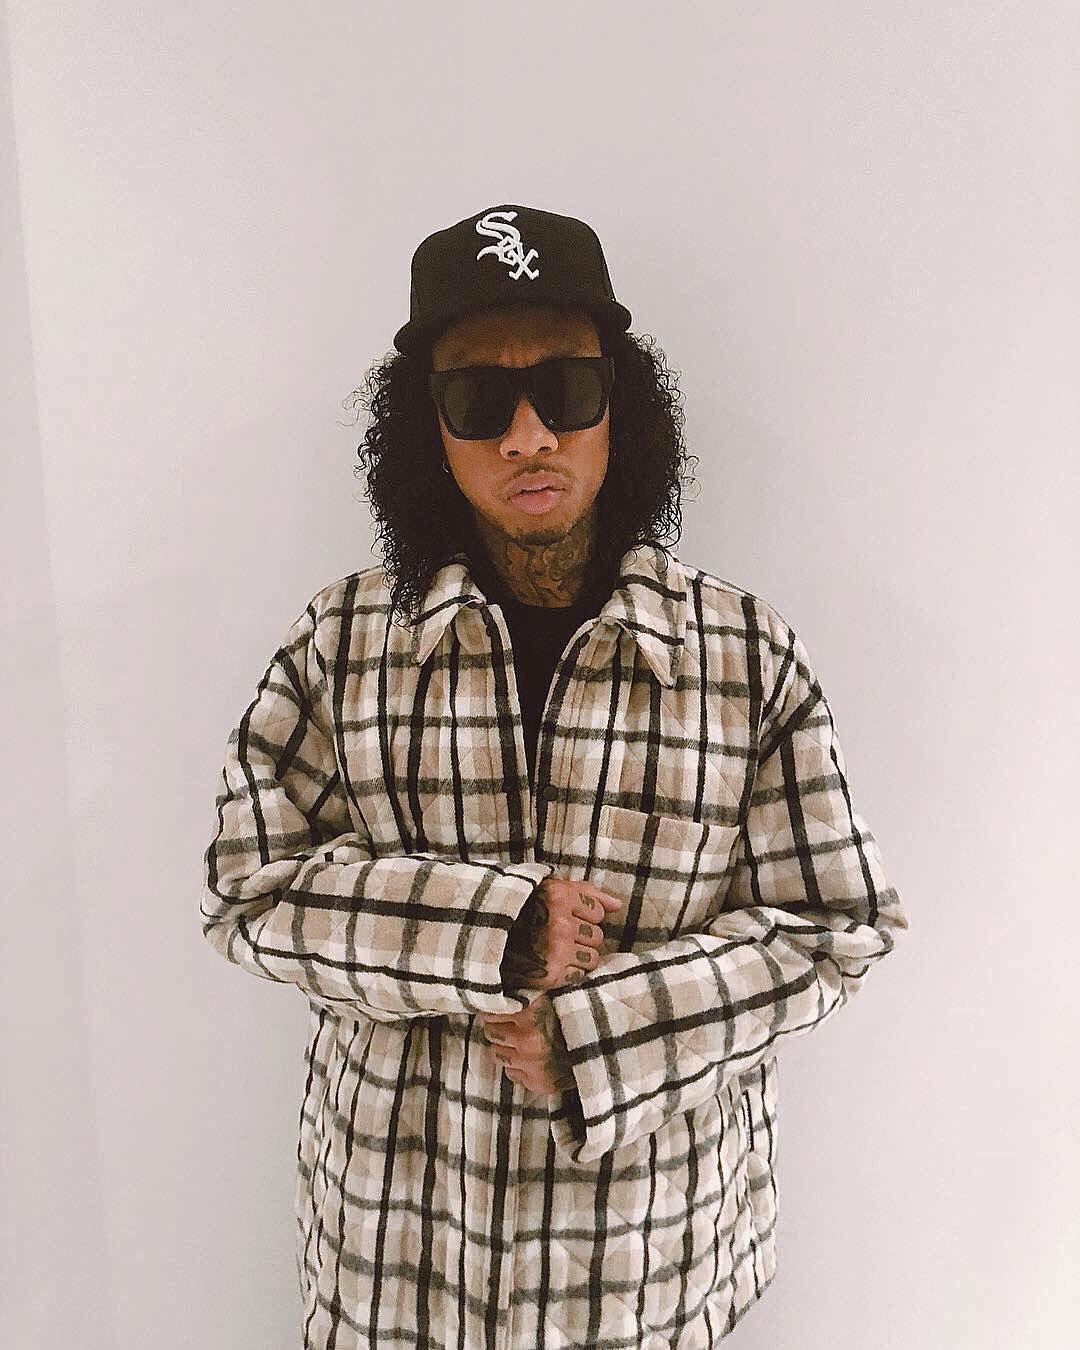 STRAIGHT OUTTA #COMPTON #Tyga dressed up as the legendary